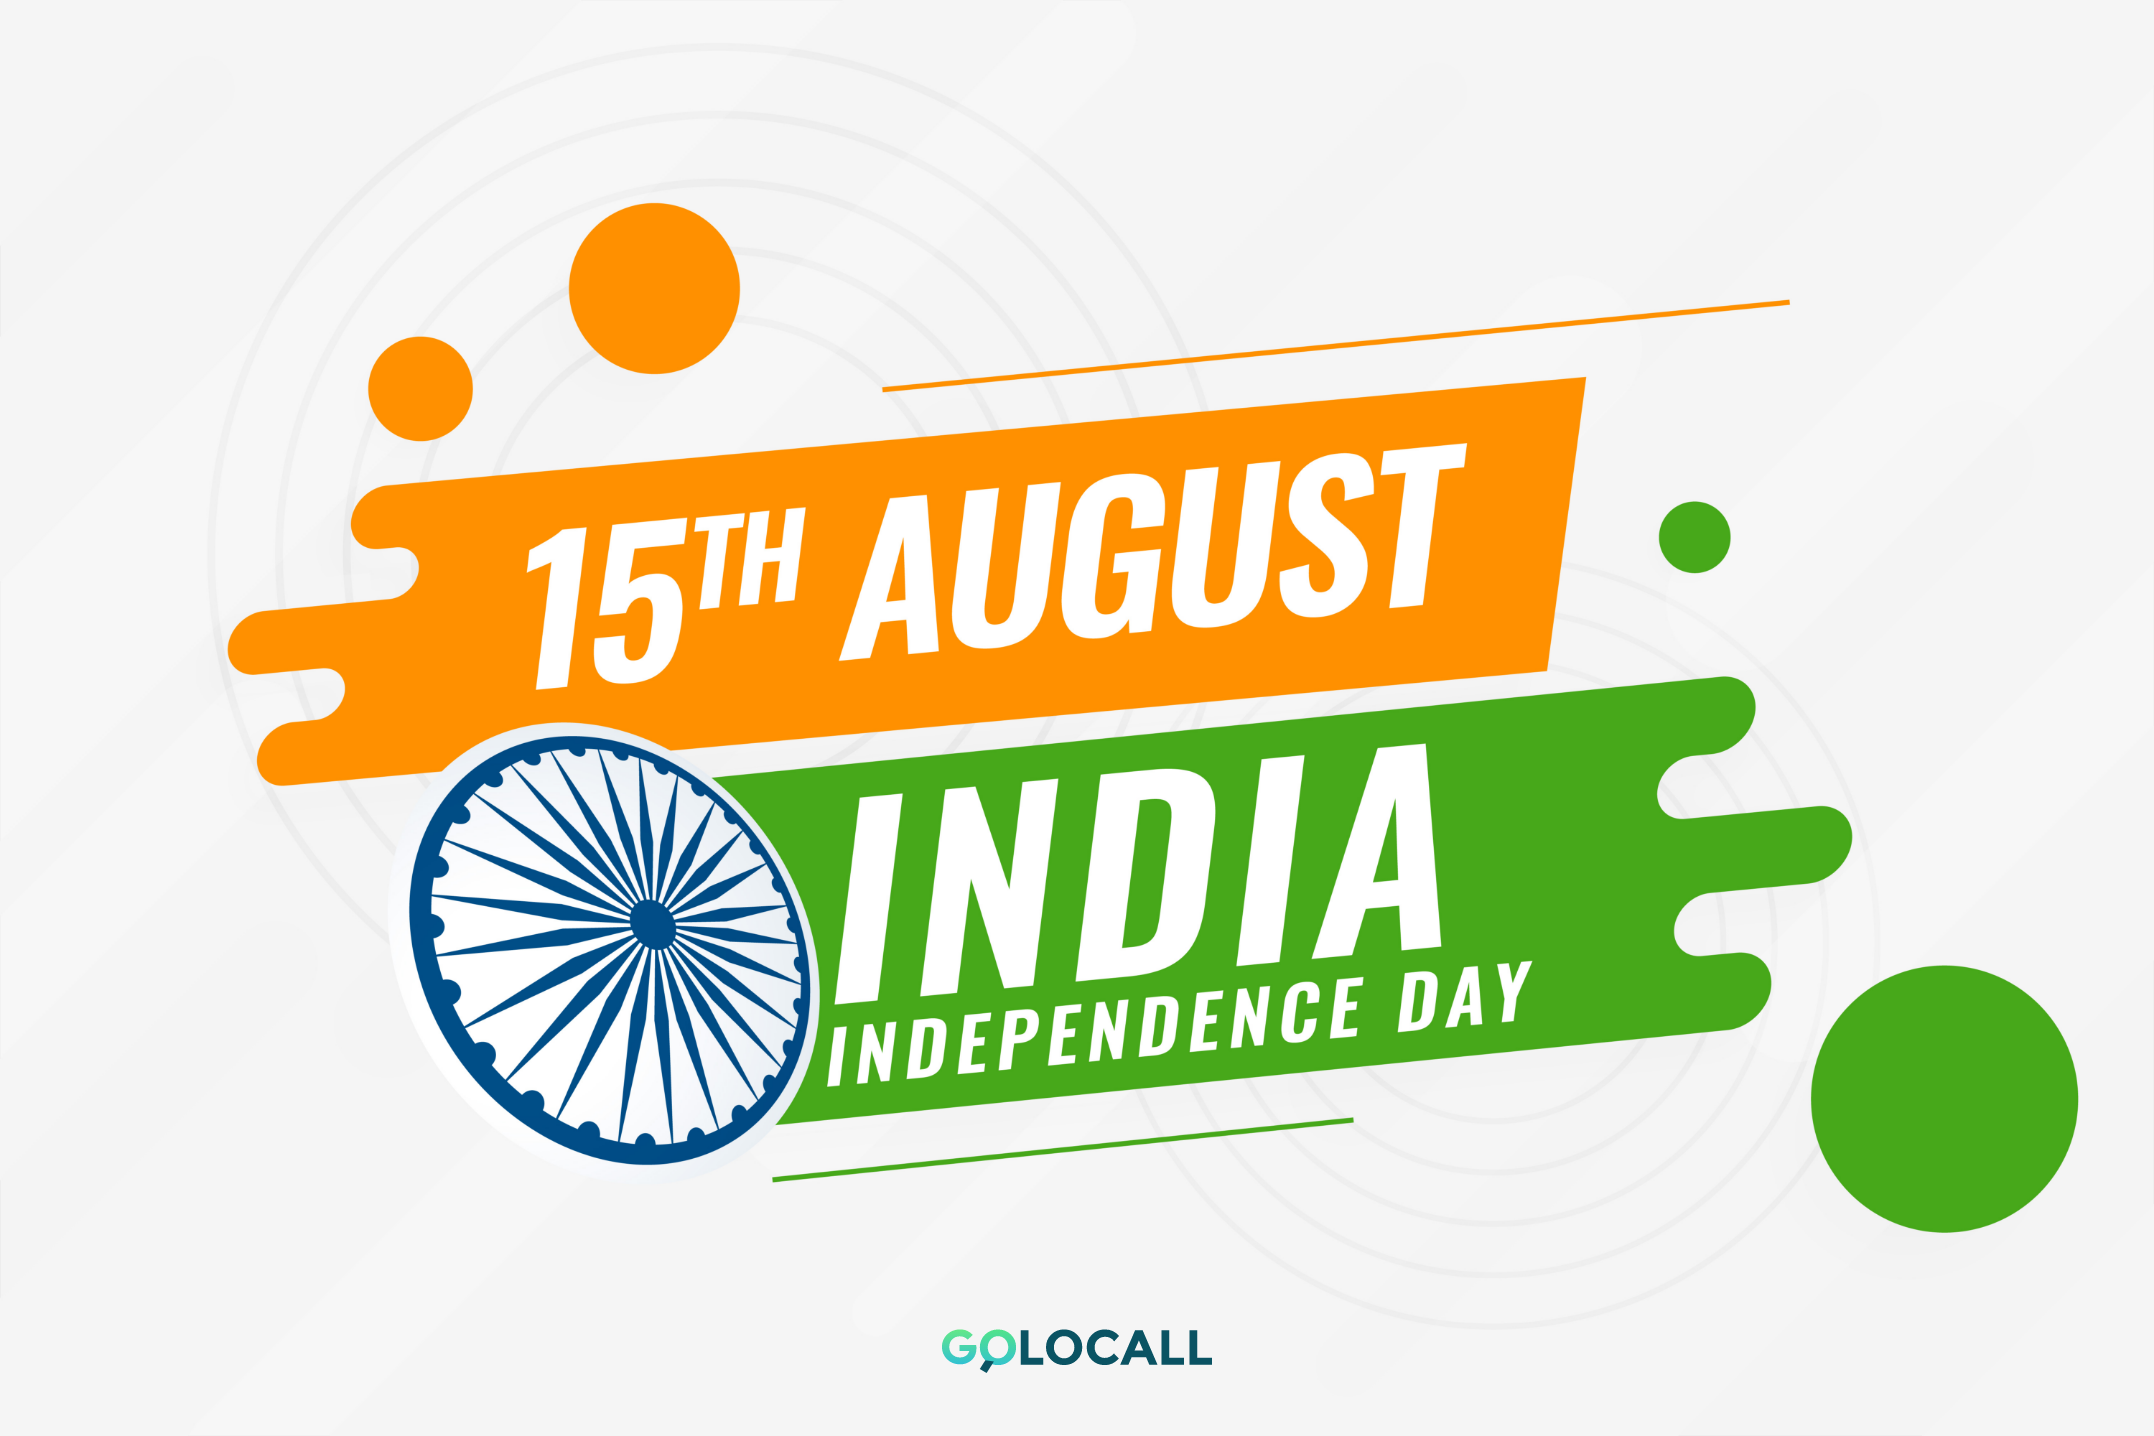 Wish you a very Happy Independence Day